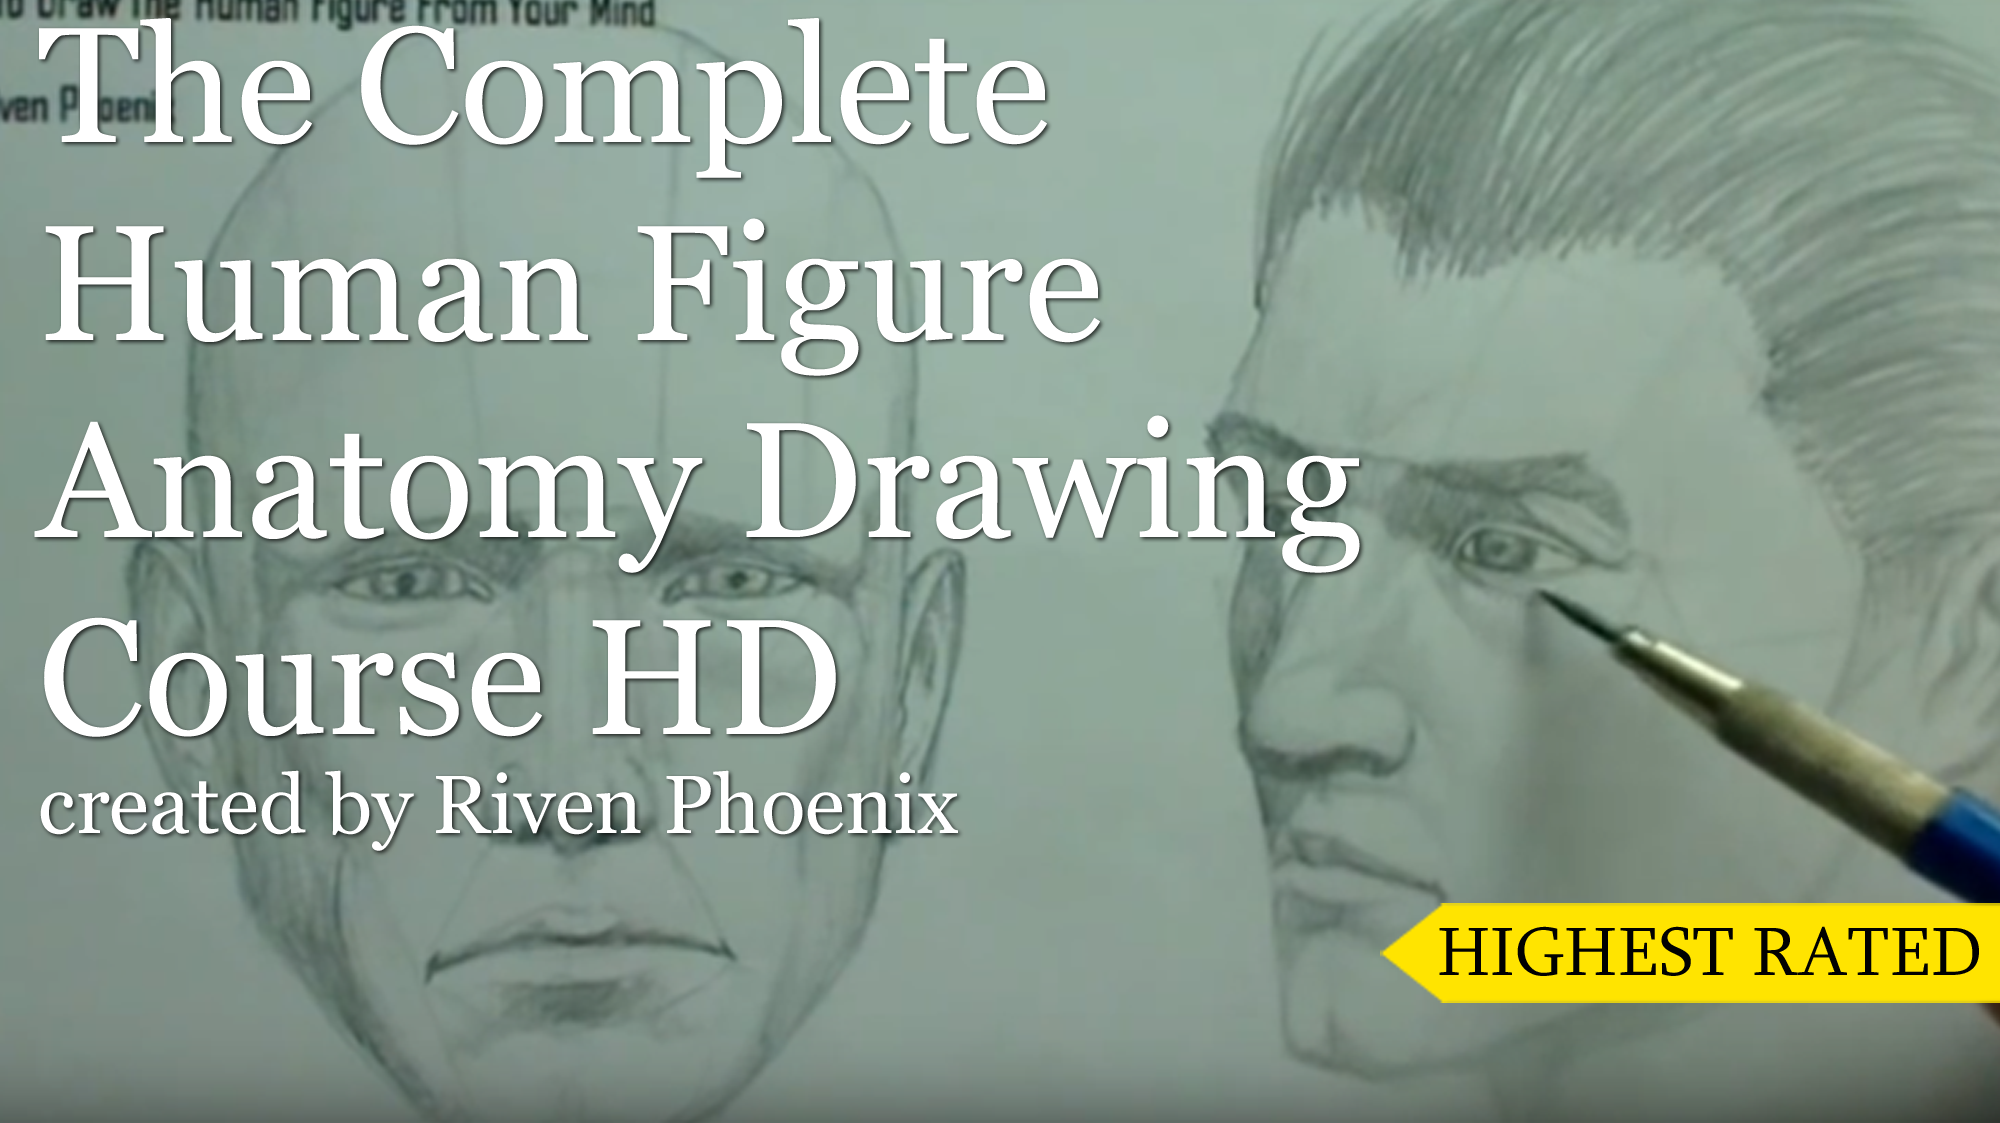 The Complete Anatomy Drawing Course HD